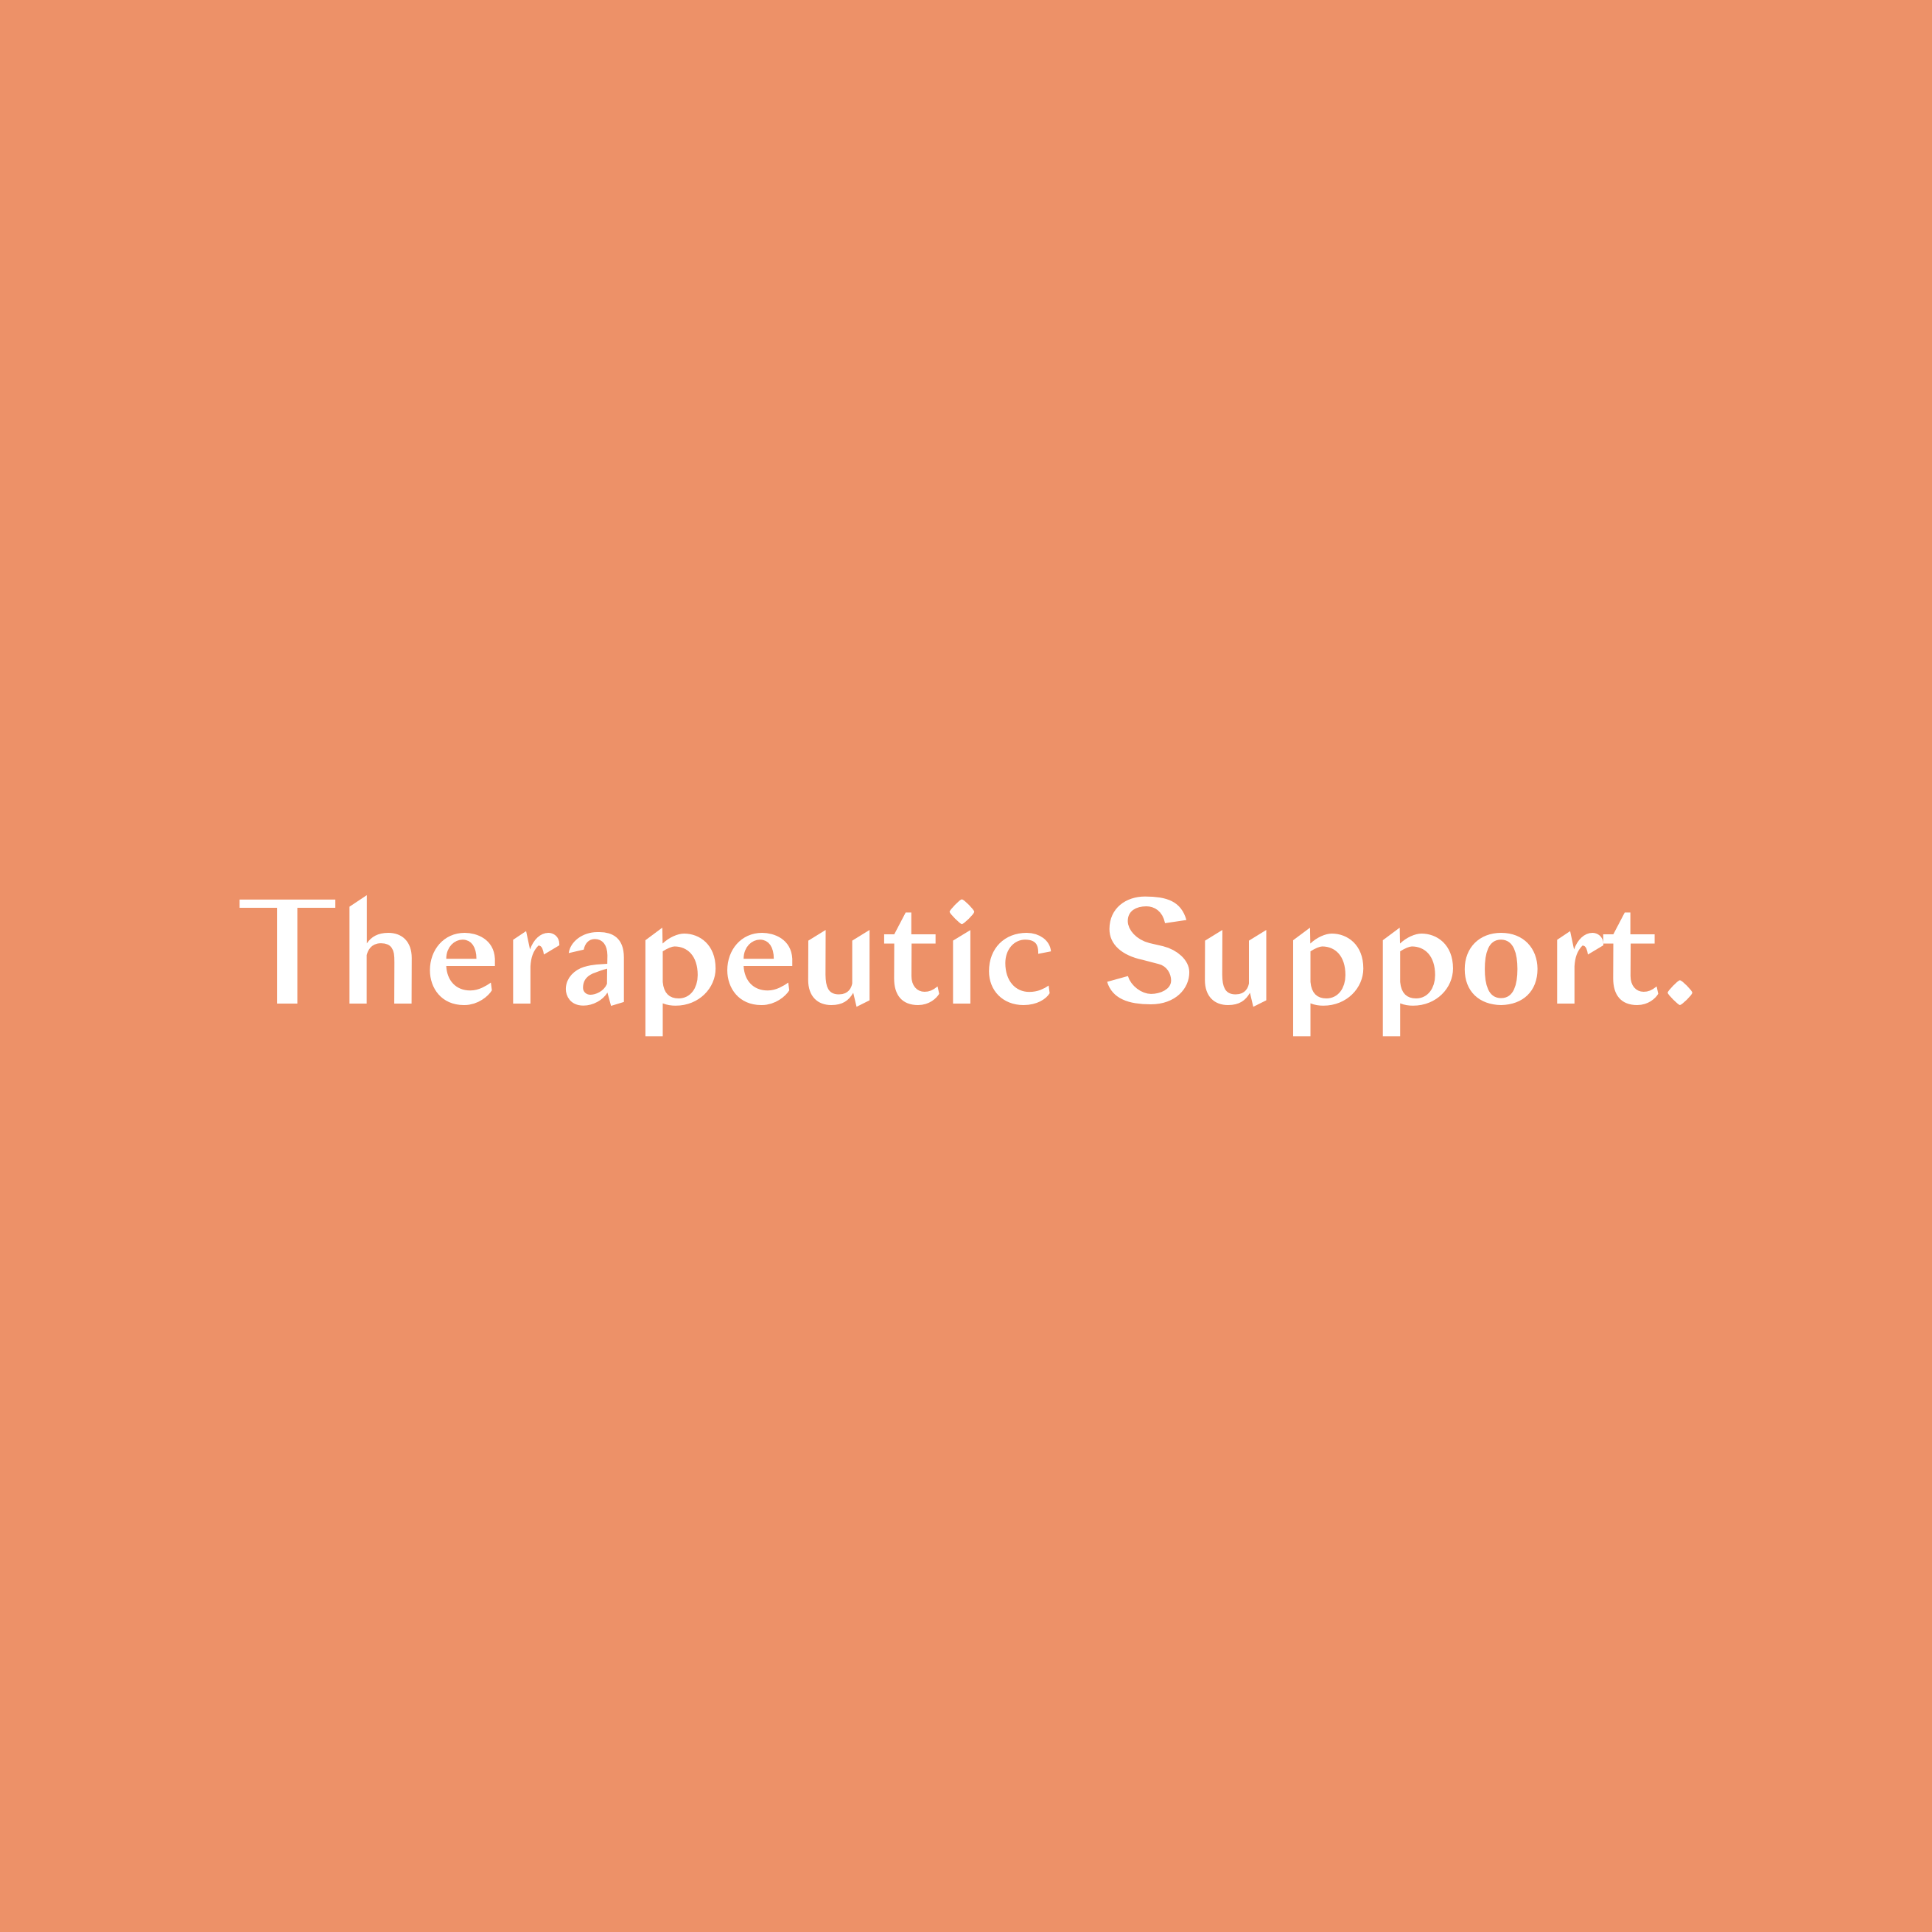 Therapeutic Support